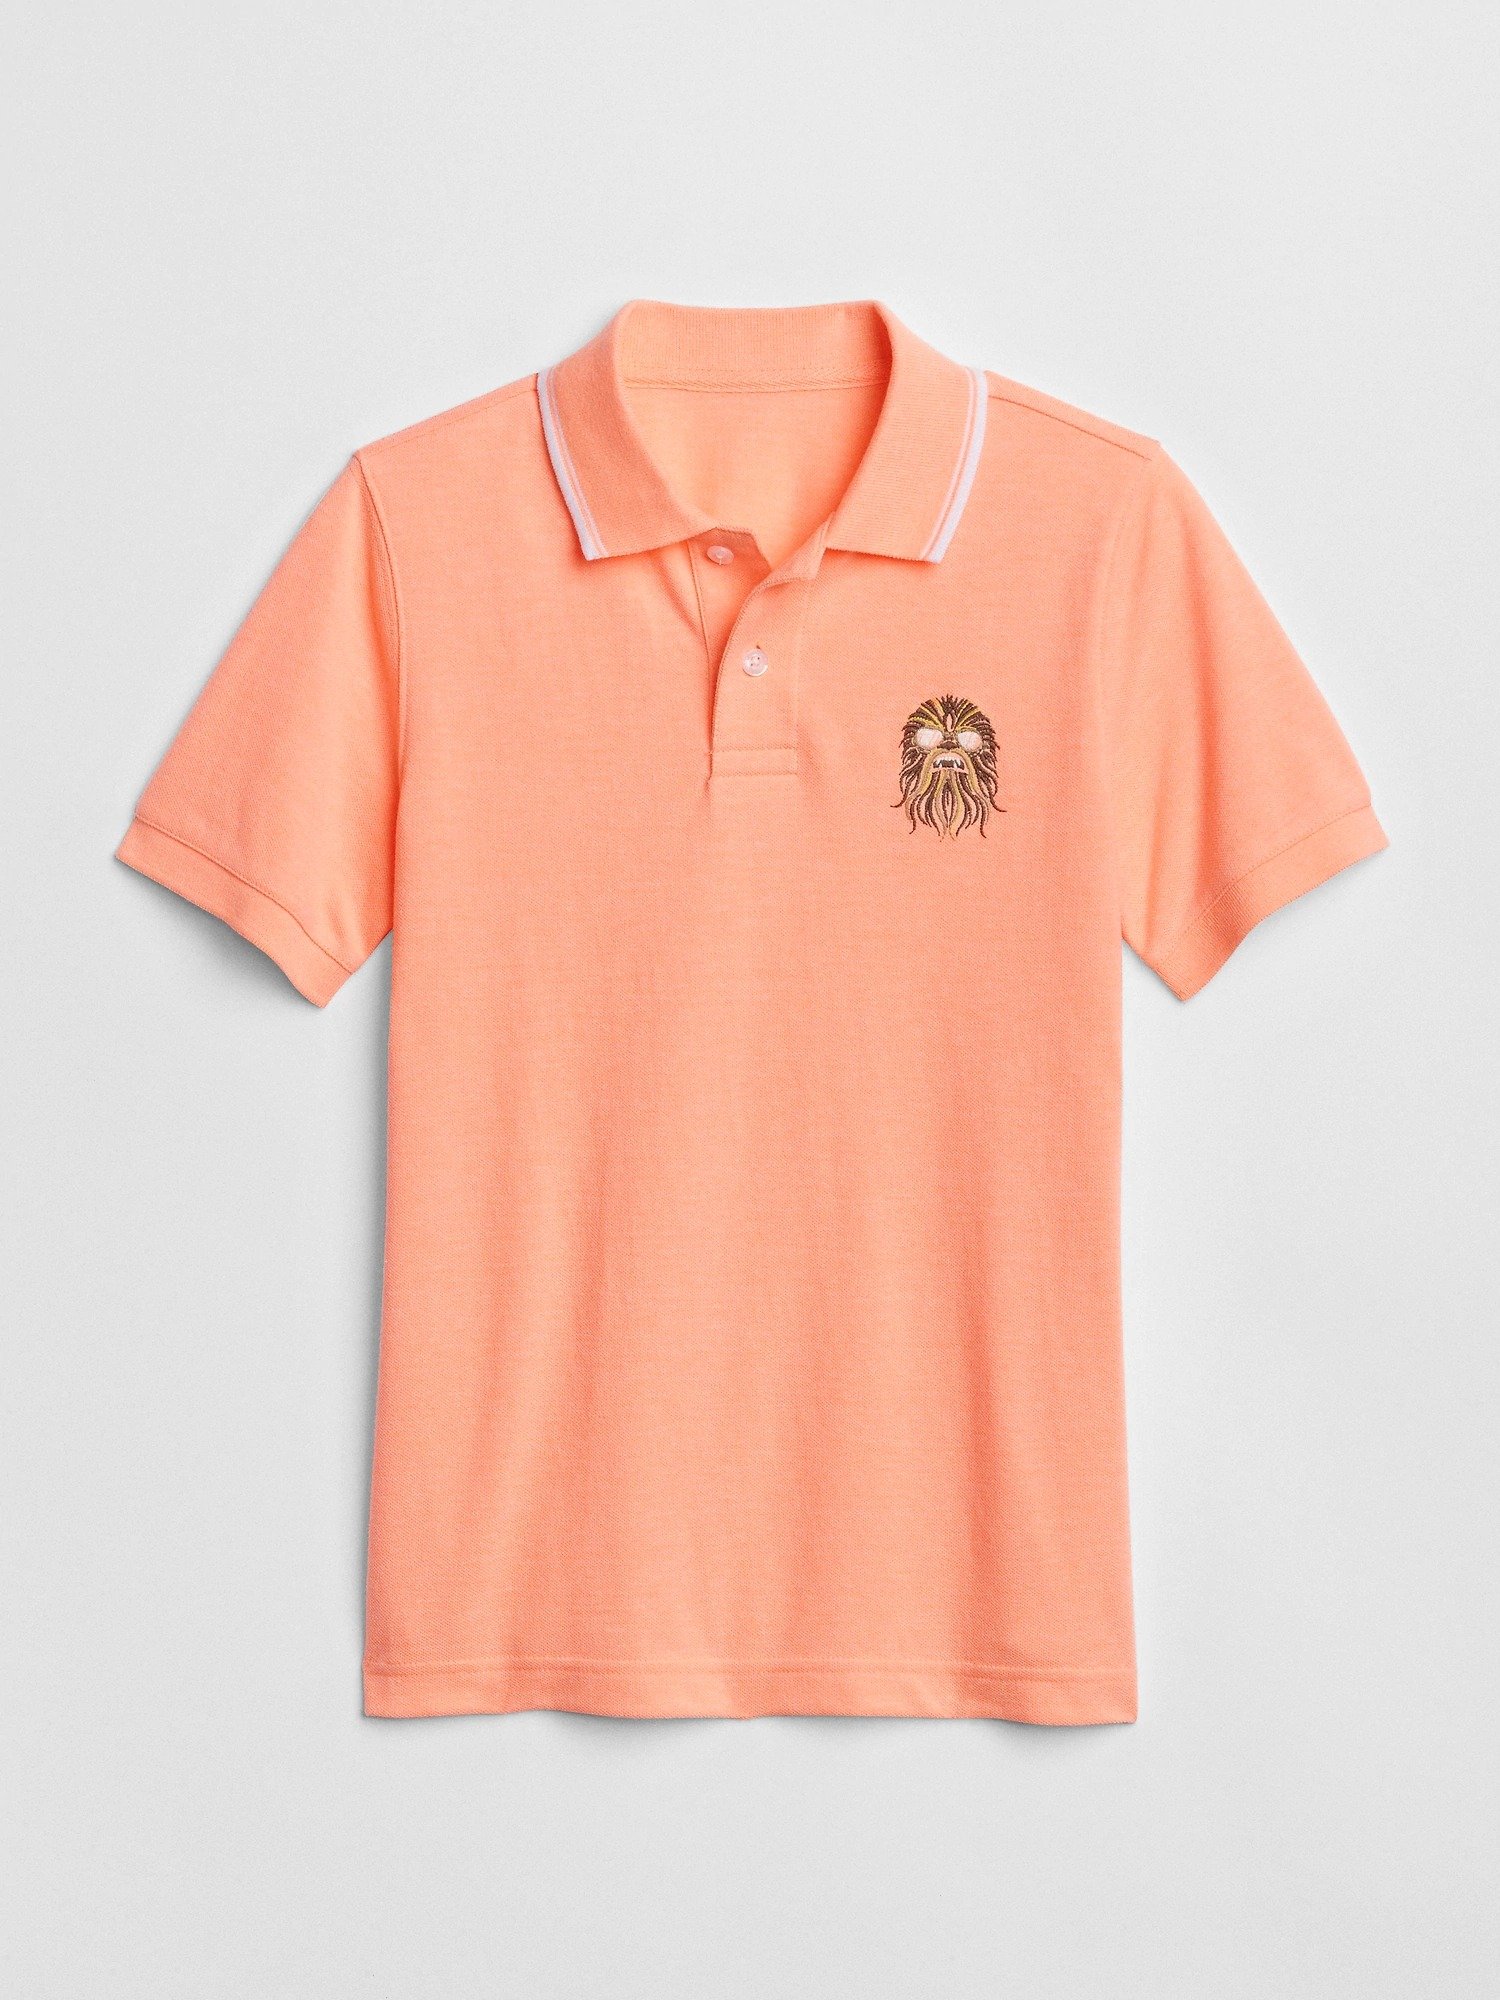 GapKids | Star Wars™ polo t-shirt product image